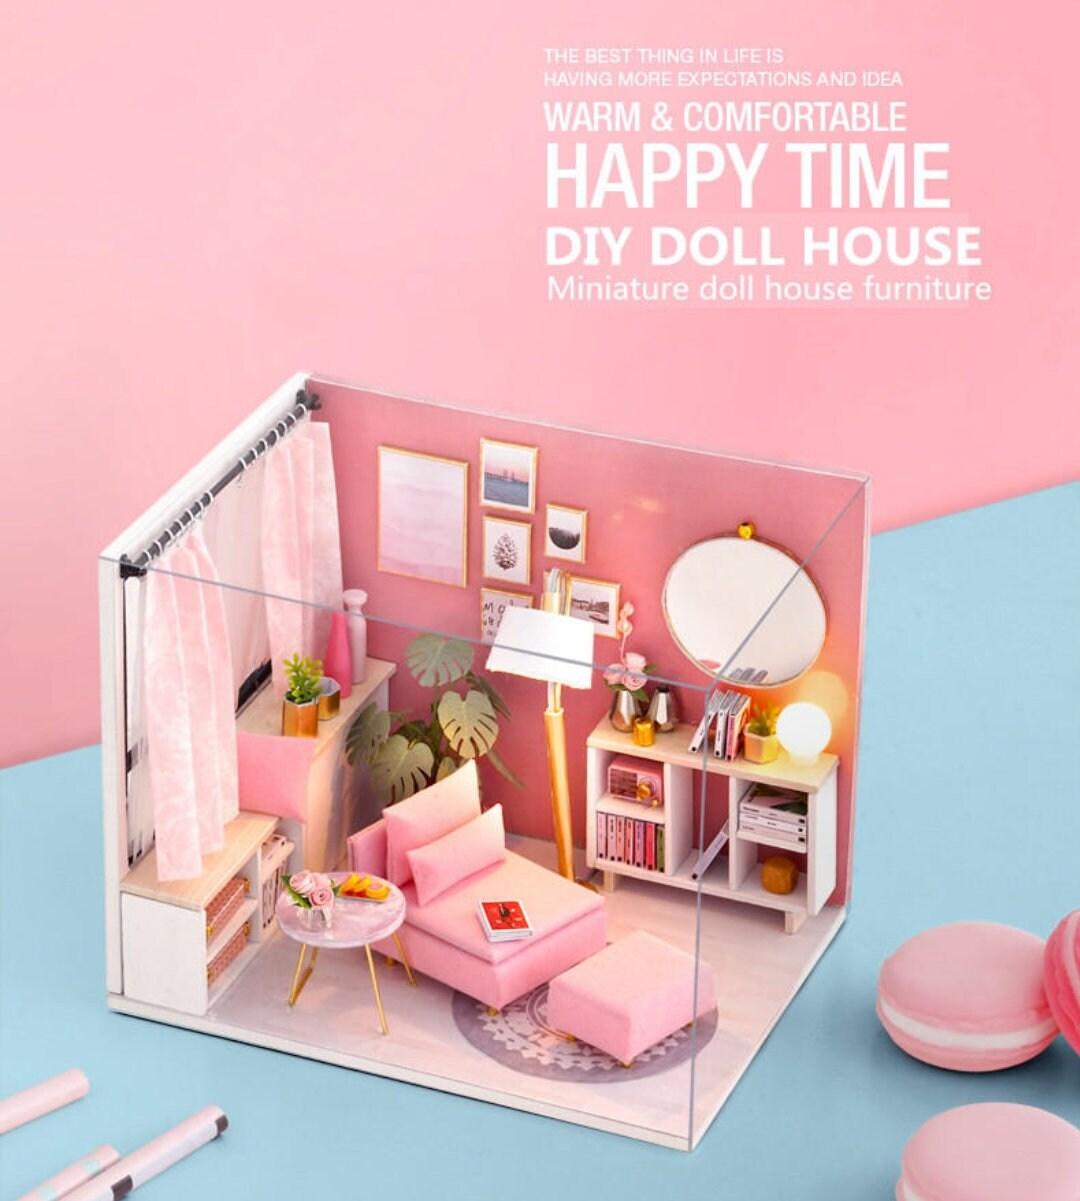 DIY Dollhouse Kit Living Room Miniature House with Furniture Adult Craft DIY Kits children gift